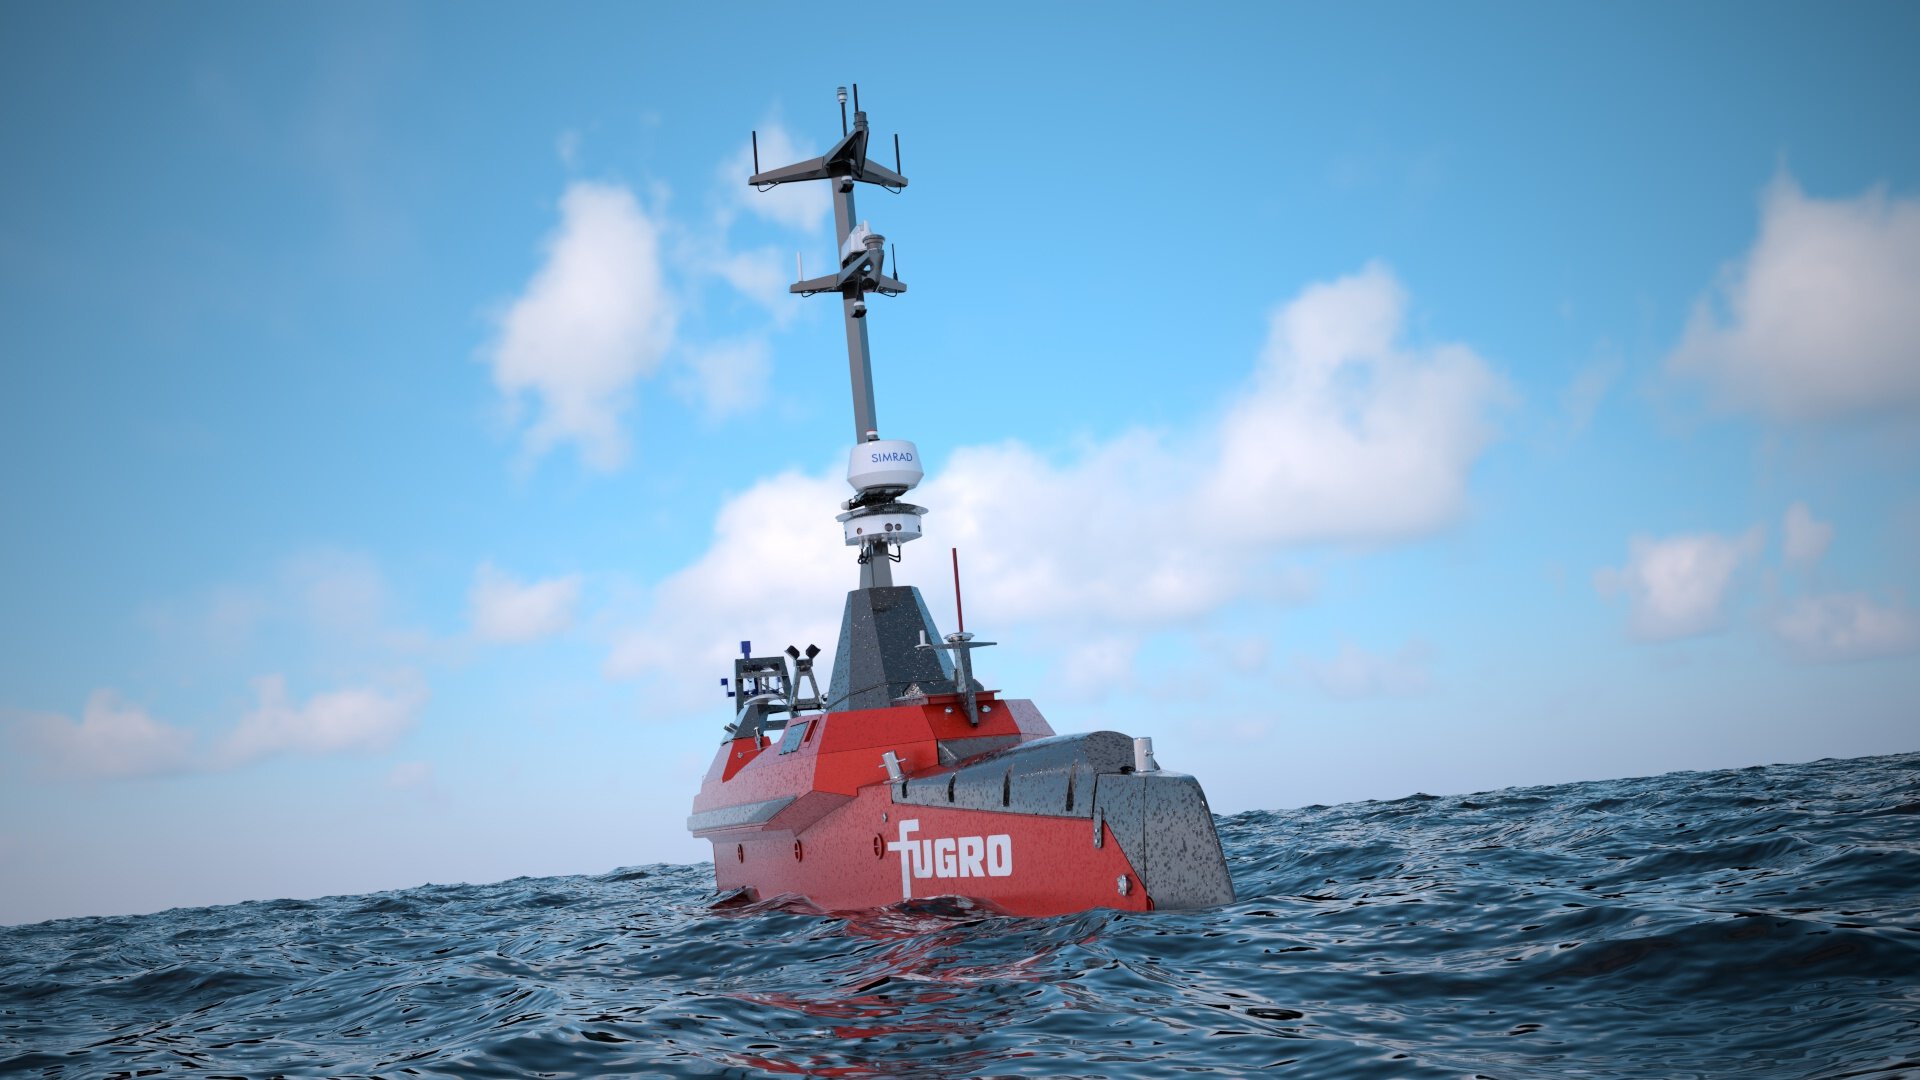 Fugro Blue Shadow has been designed for safe and efficient hydrographic and geophysical survey operations for medium to large scale projects, in both nearshore and offshore environments.

Its wave-piercing design and stability enables greater weather tolerance and the ability to operate in high sea states. Equipped with dual-band radar, automatic identification system (AIS) and 360� view cameras (including infrared for night operations), Fugro Blue Shadow has advanced situational awareness and incorporates both obstacle and collision avoidance within its navigation software to ensure operations are conducted to the highest safety standards.